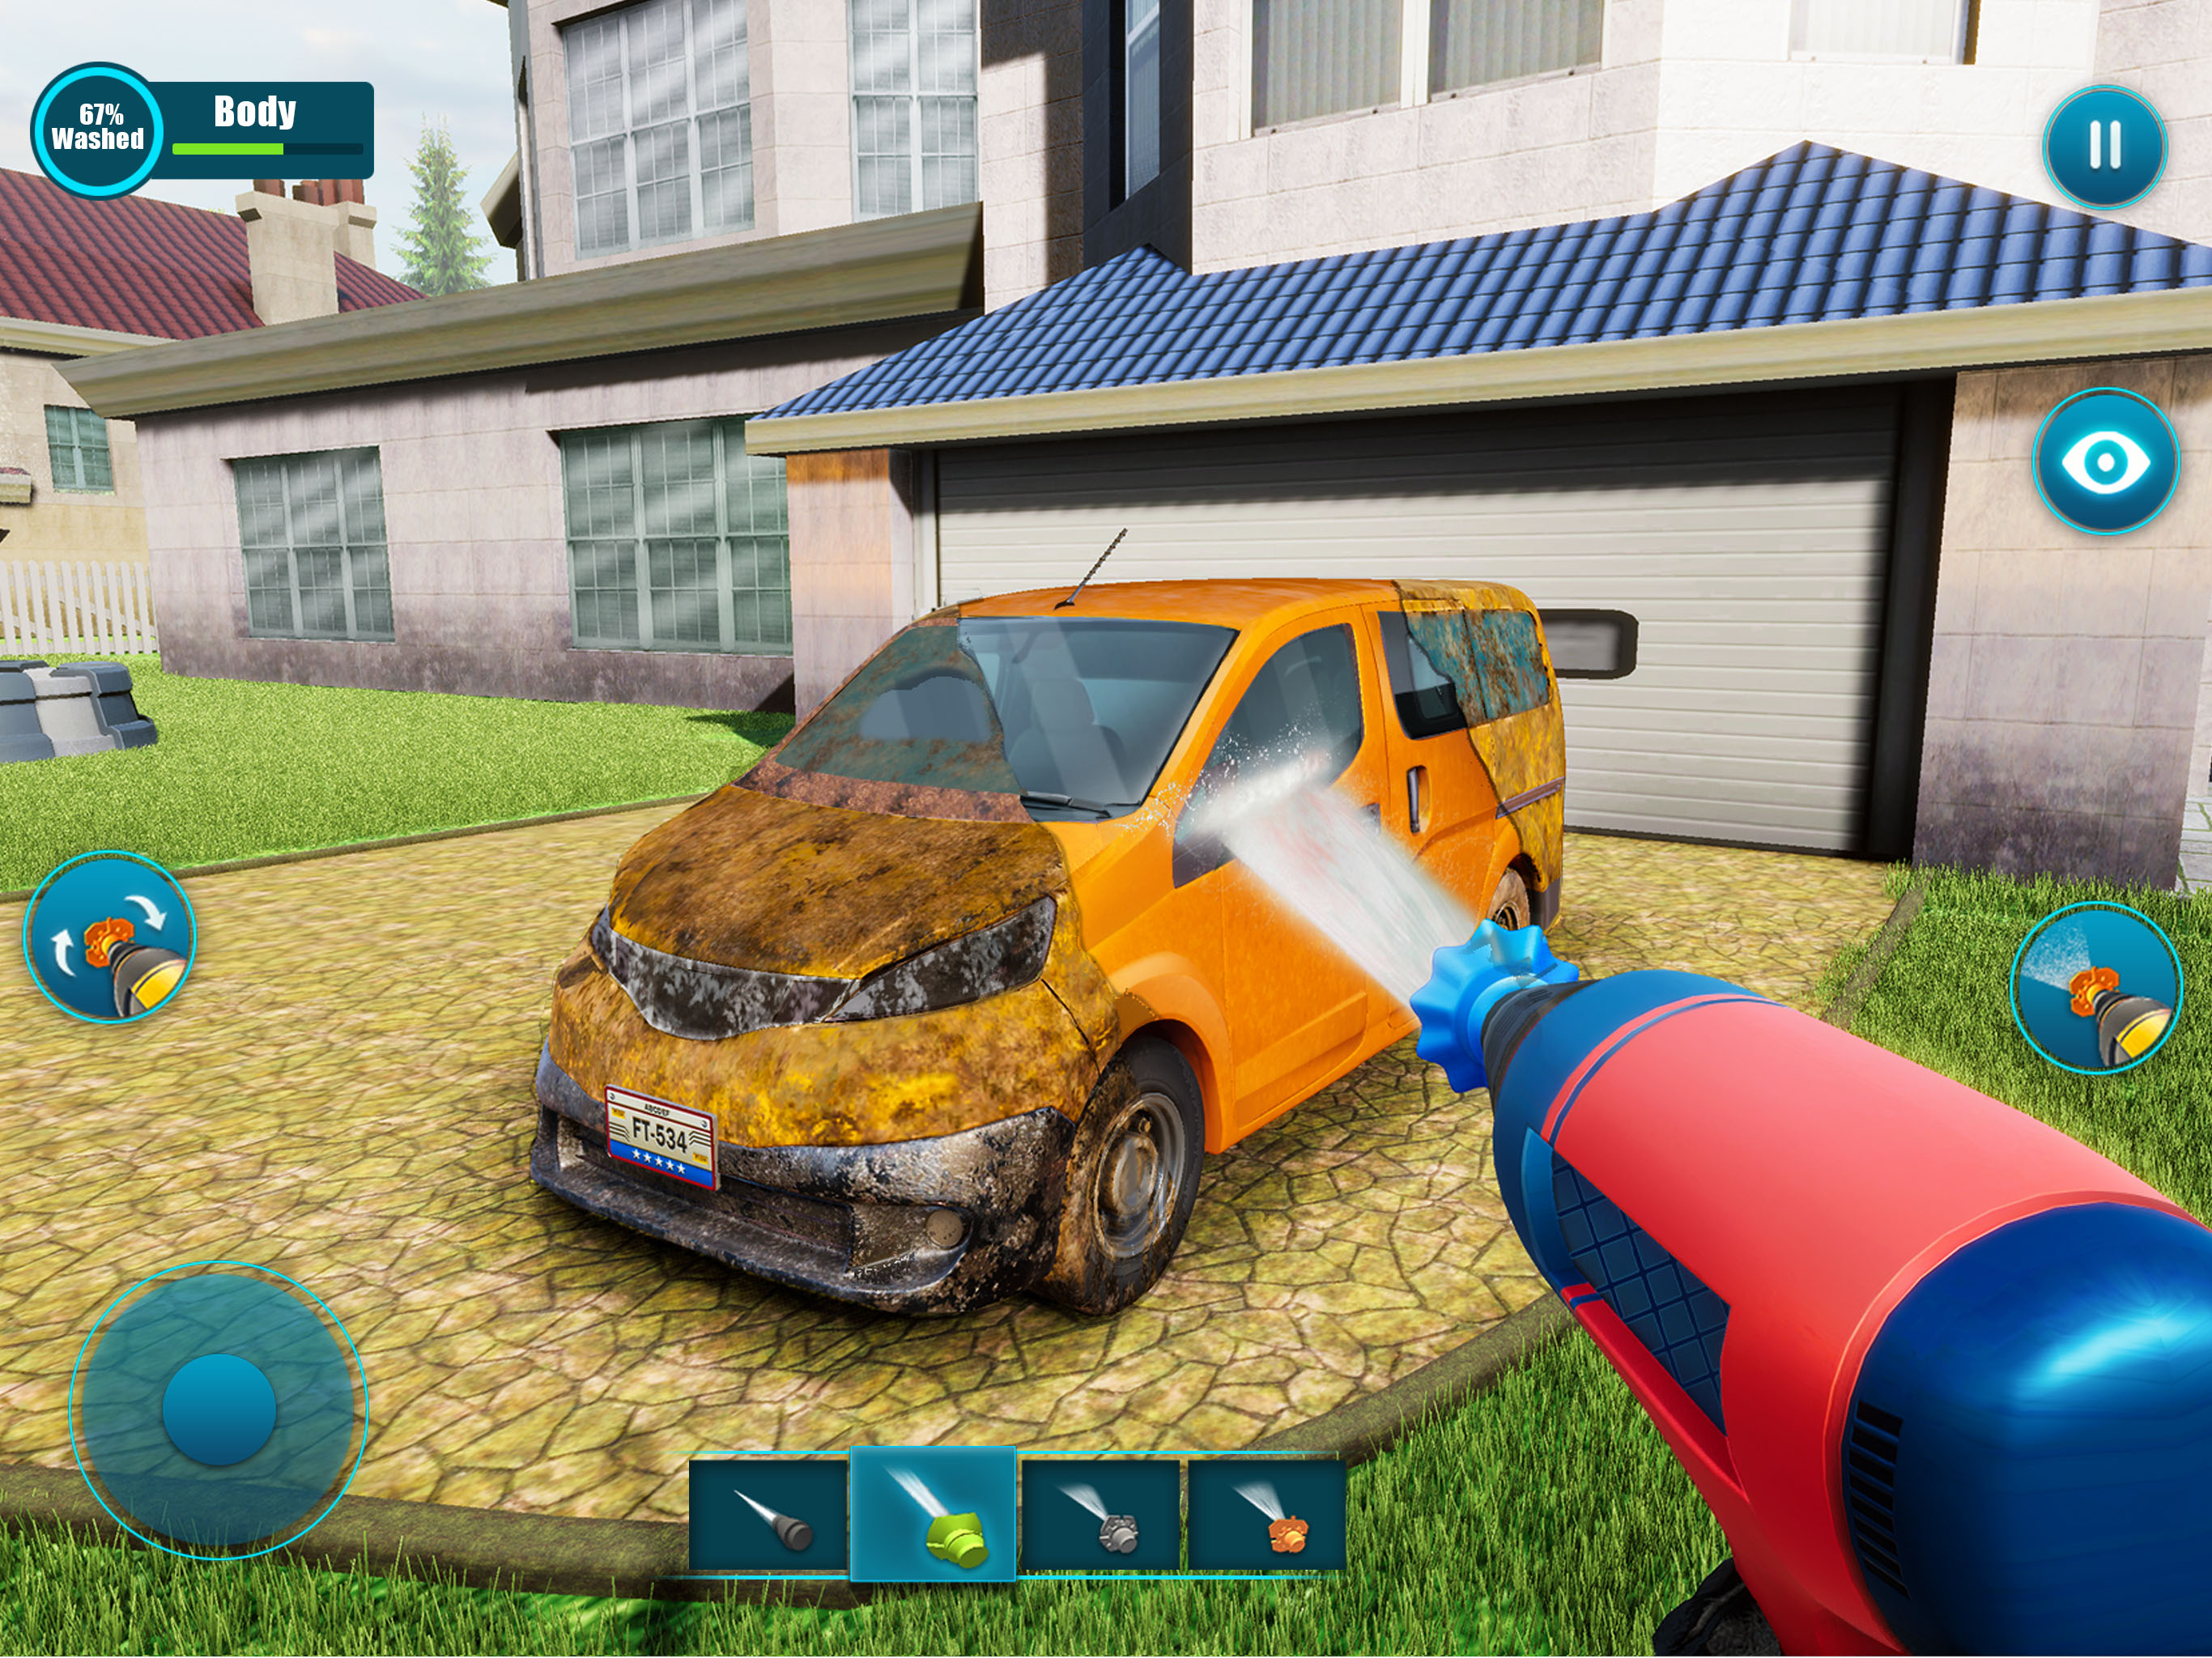 Download and play Powerwash Simulator Guide on PC with MuMu Player